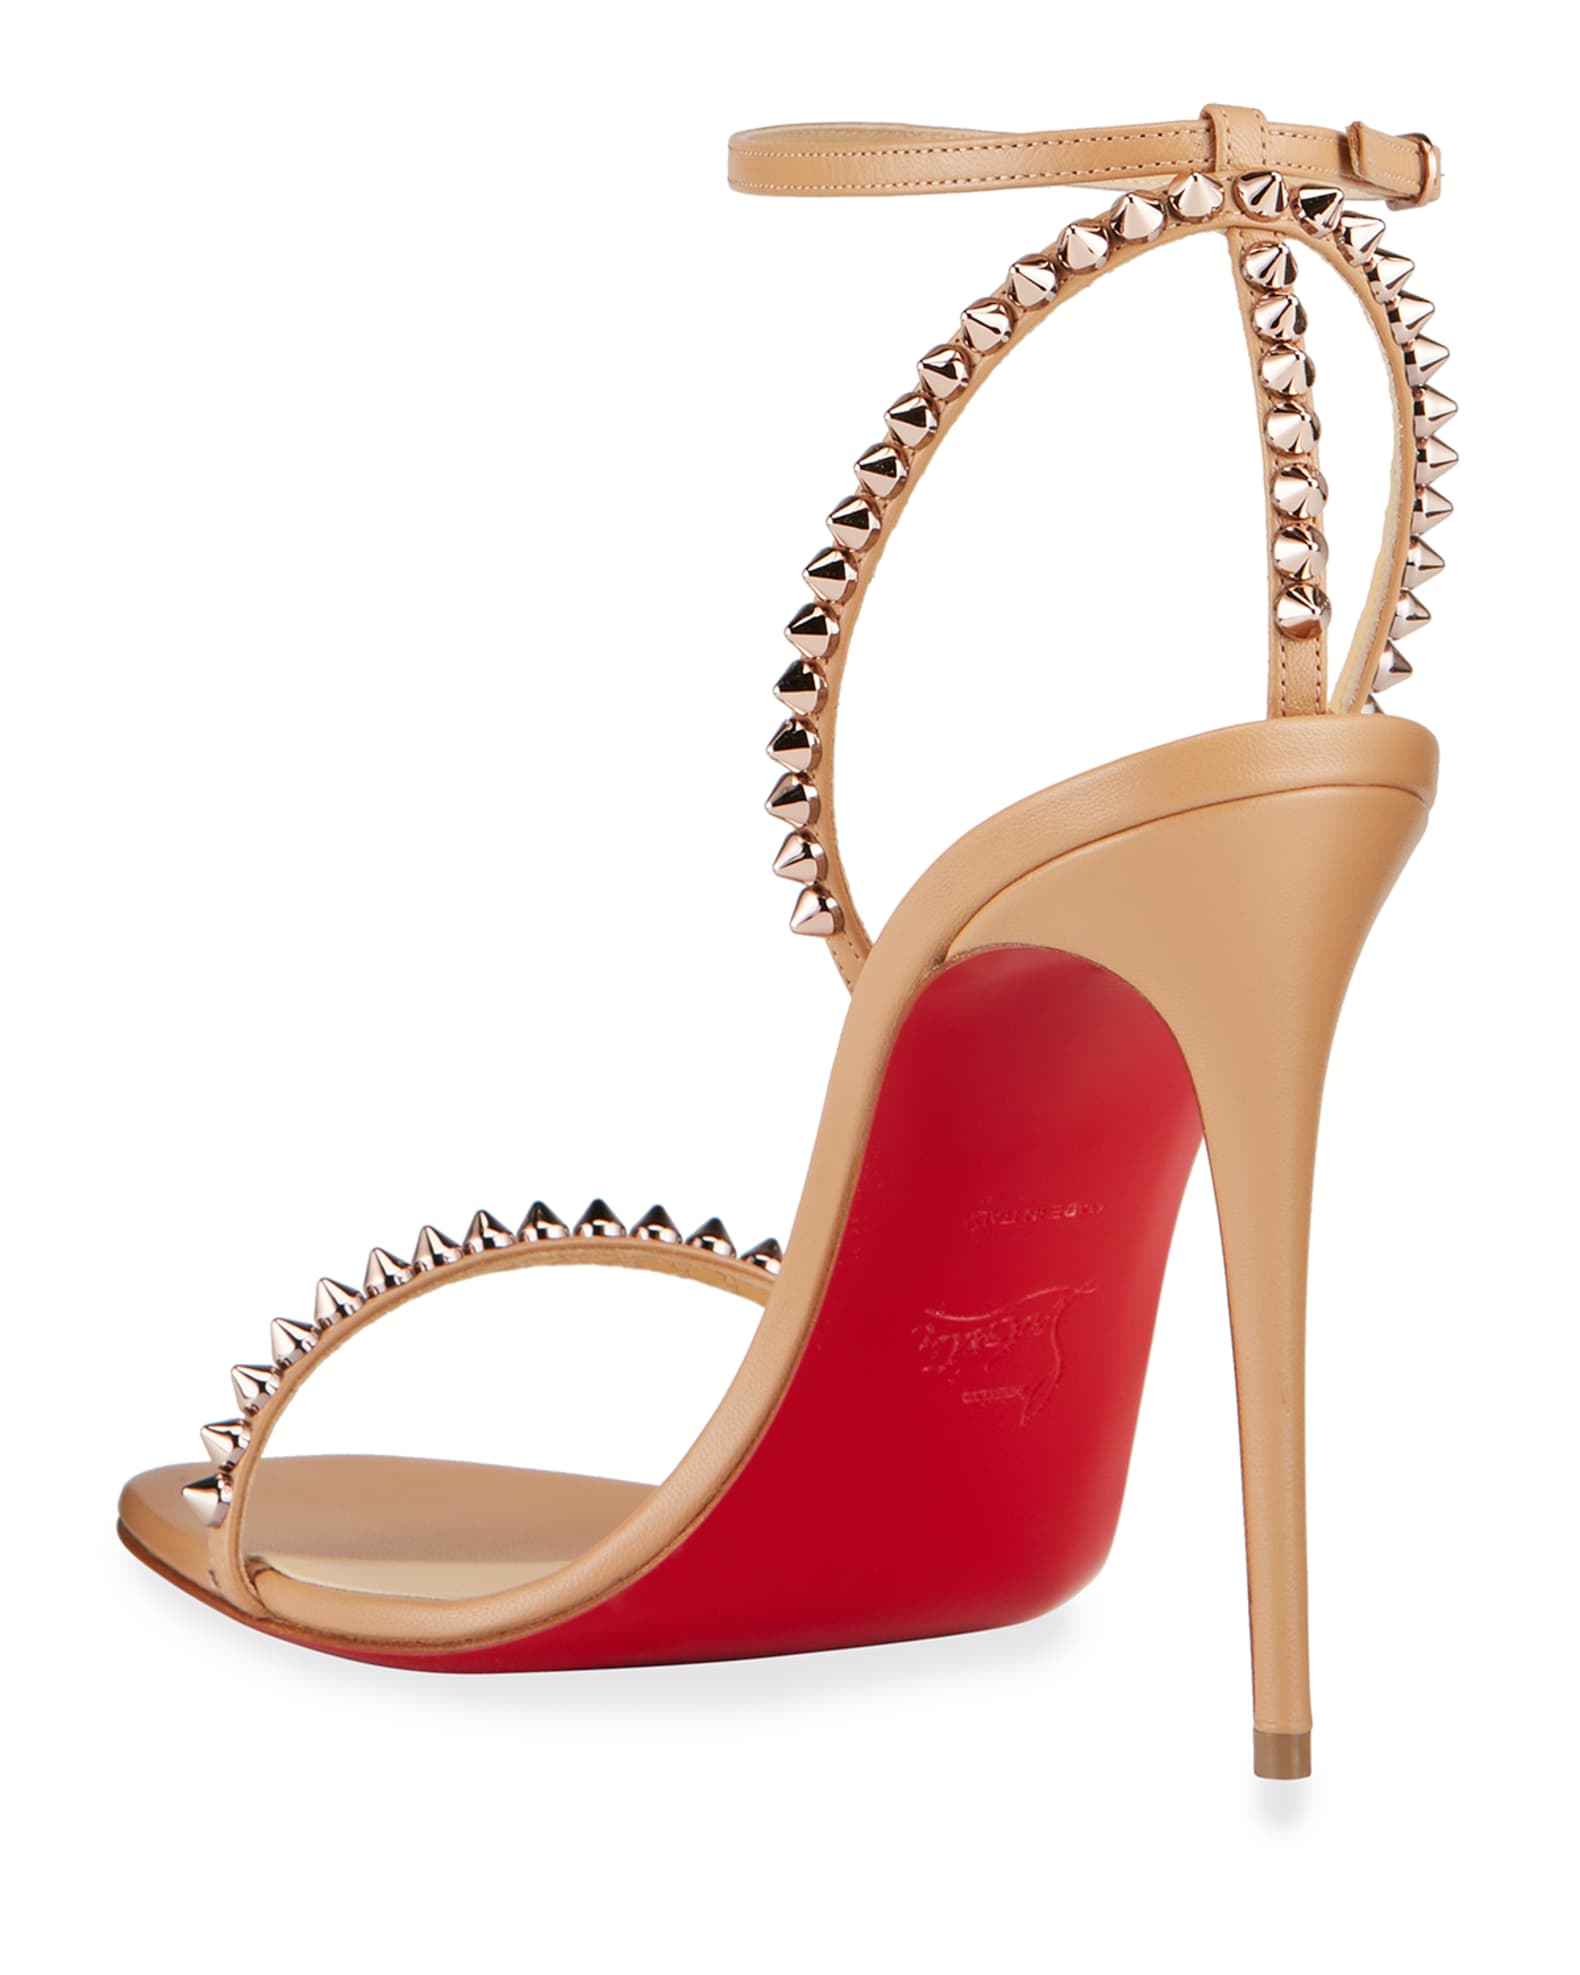 Christian Louboutin Velcrissimo Spiked Sandals